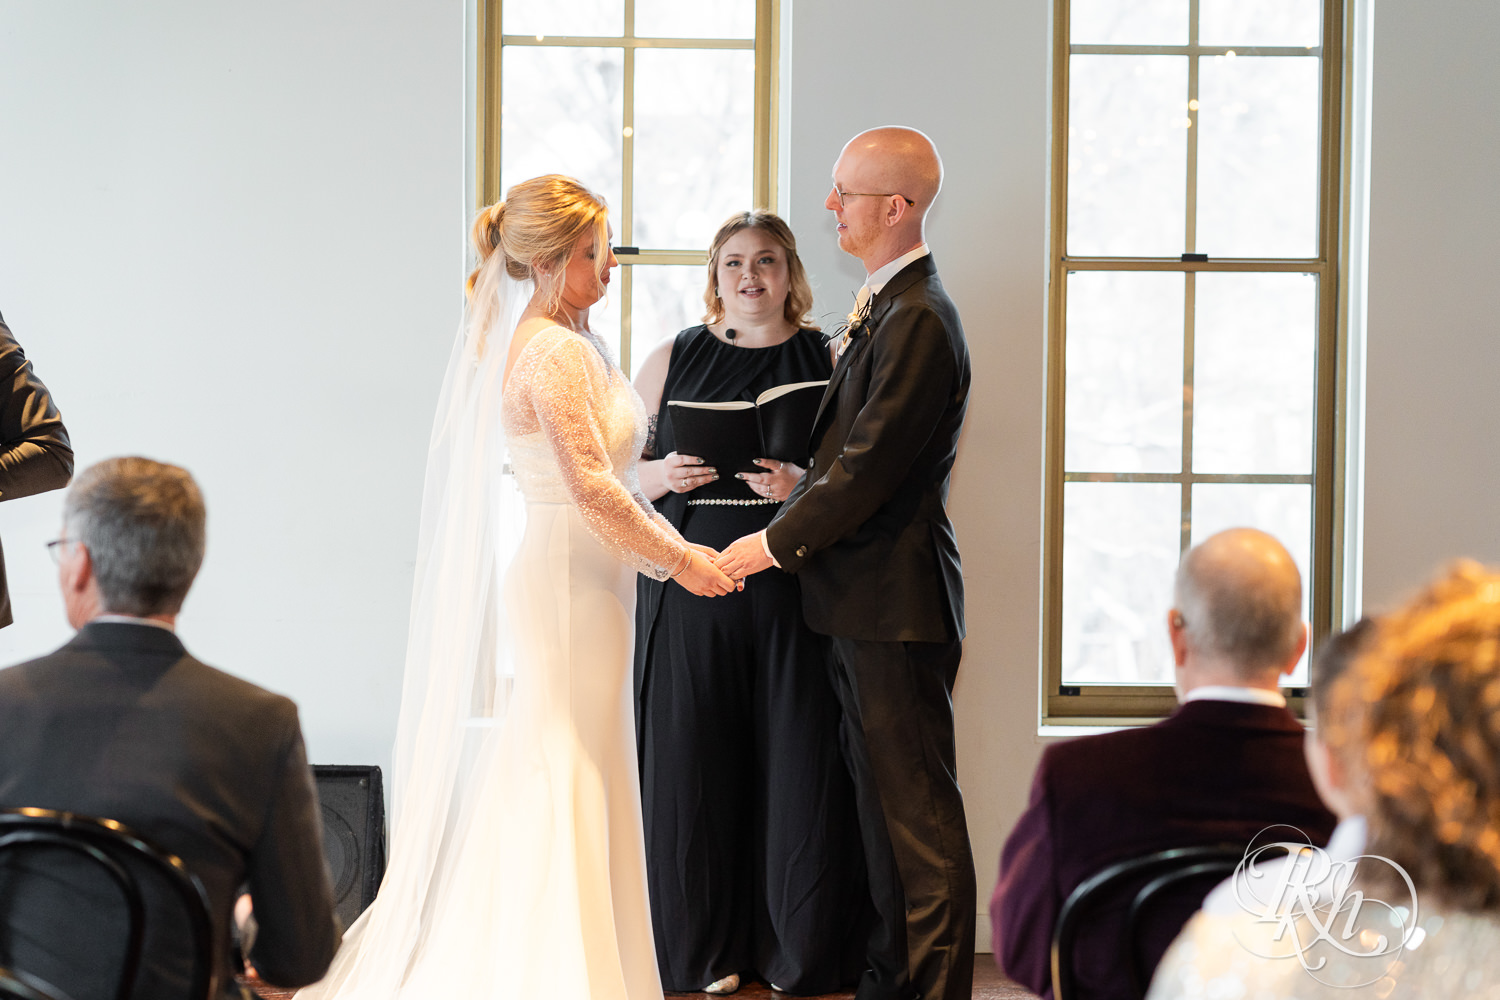 Bride and groom smile during indoor wedding ceremony at Gatherings at Station 10 in Saint Paul, Minnesota.